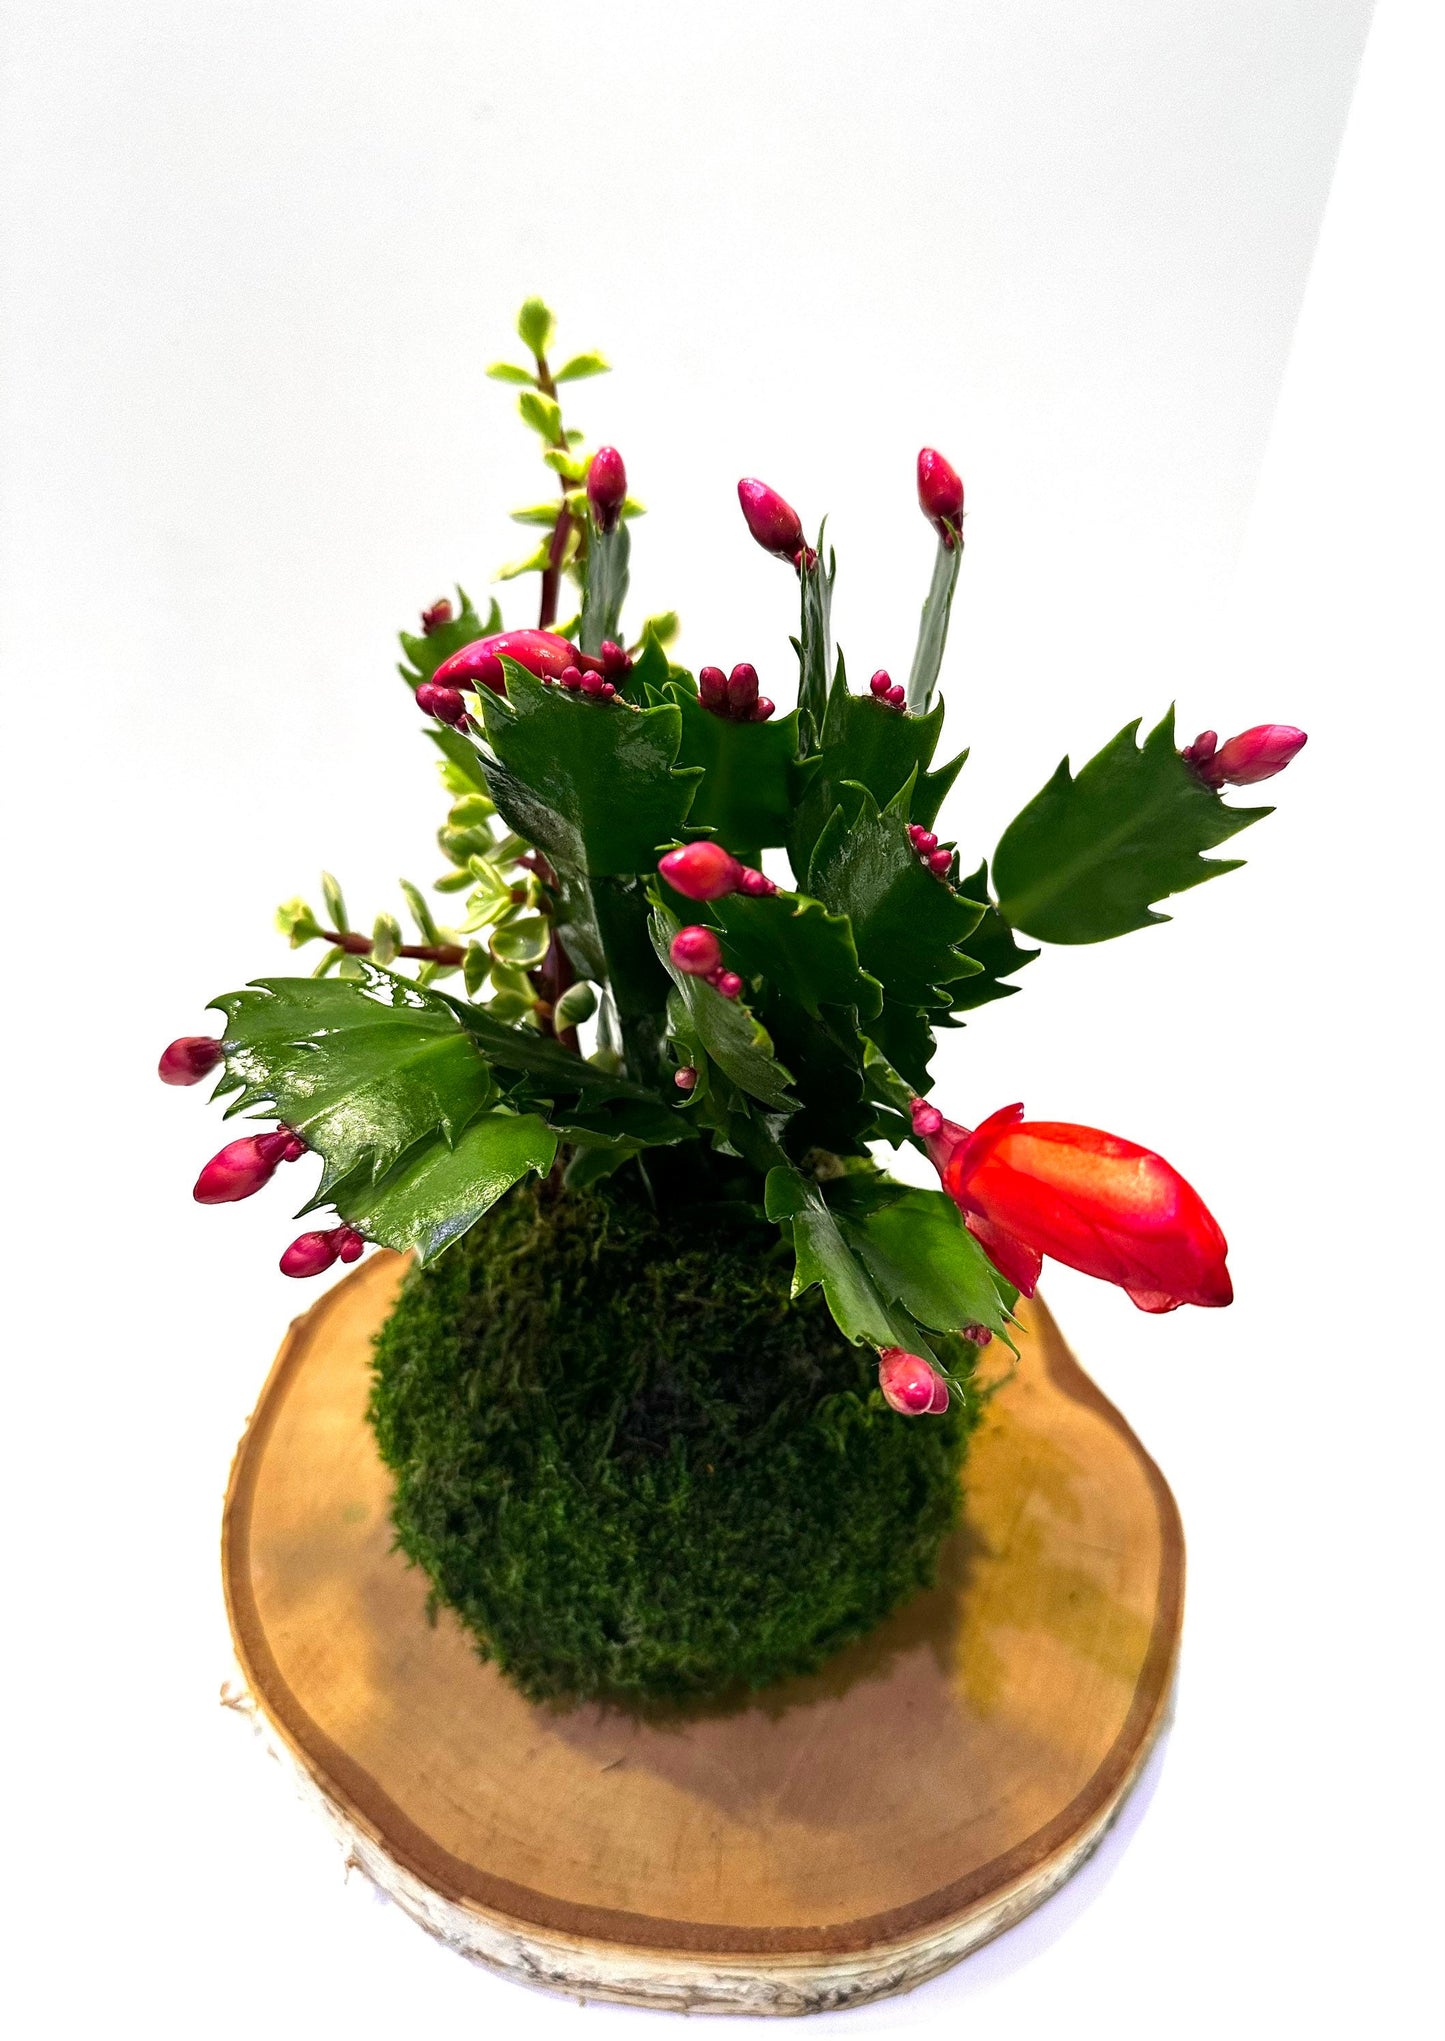 Hanging Christmas Cactus arranged Kokedama, Japanese traditional indoor moss ball garden.For hanging, with hemp rope.